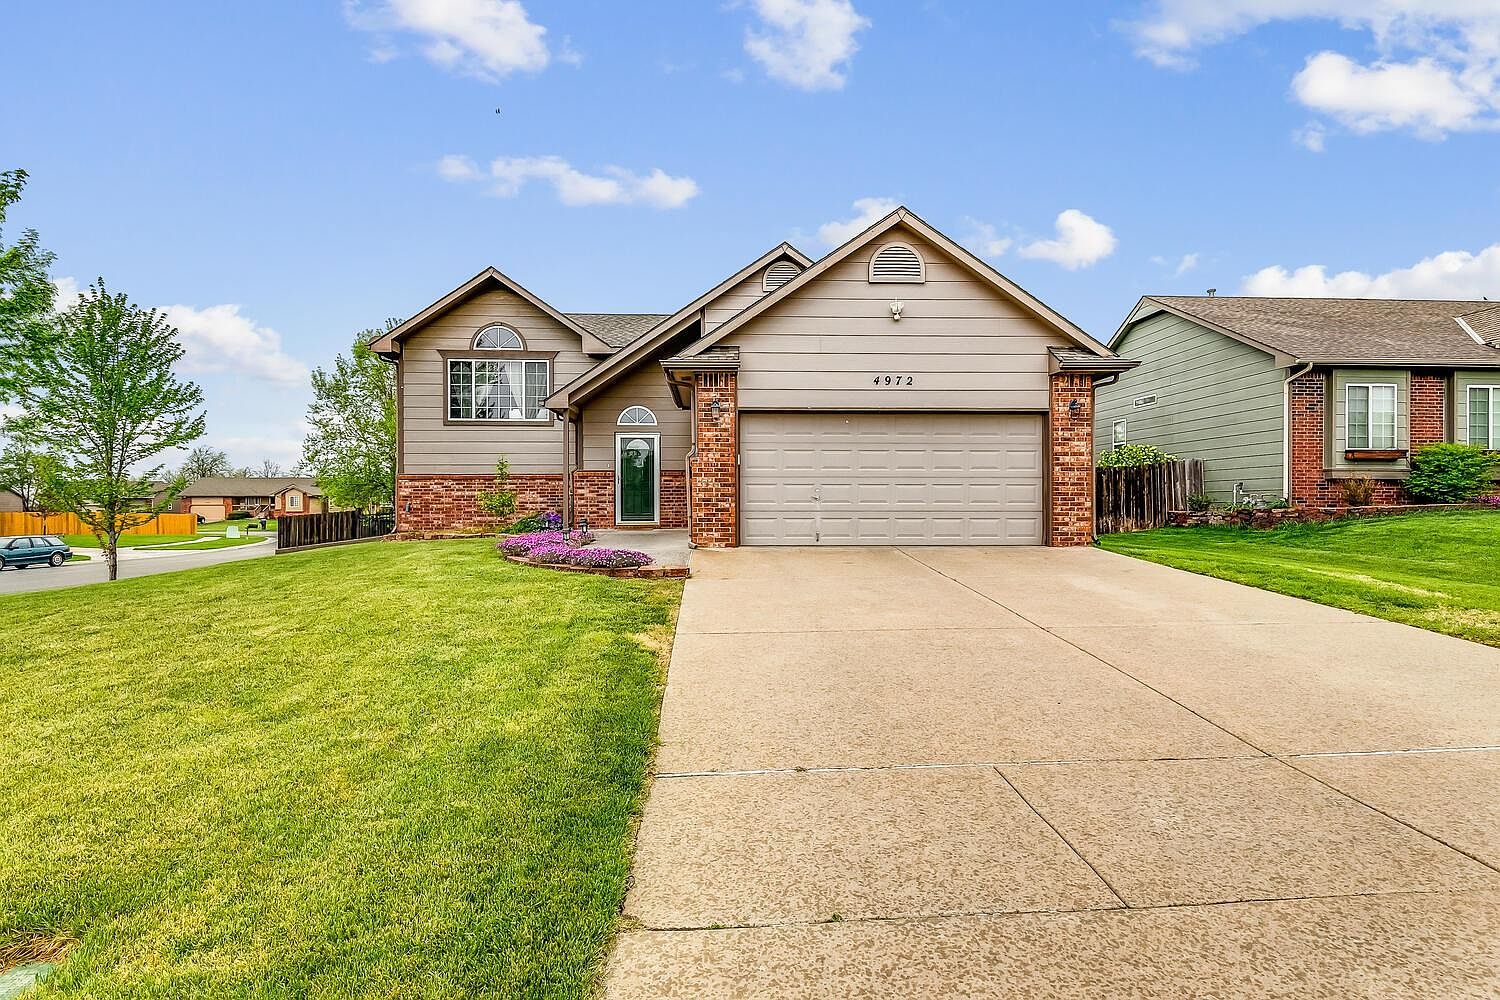 4972 N Hedgerow Ct, Bel Aire, KS 67220 | Zillow